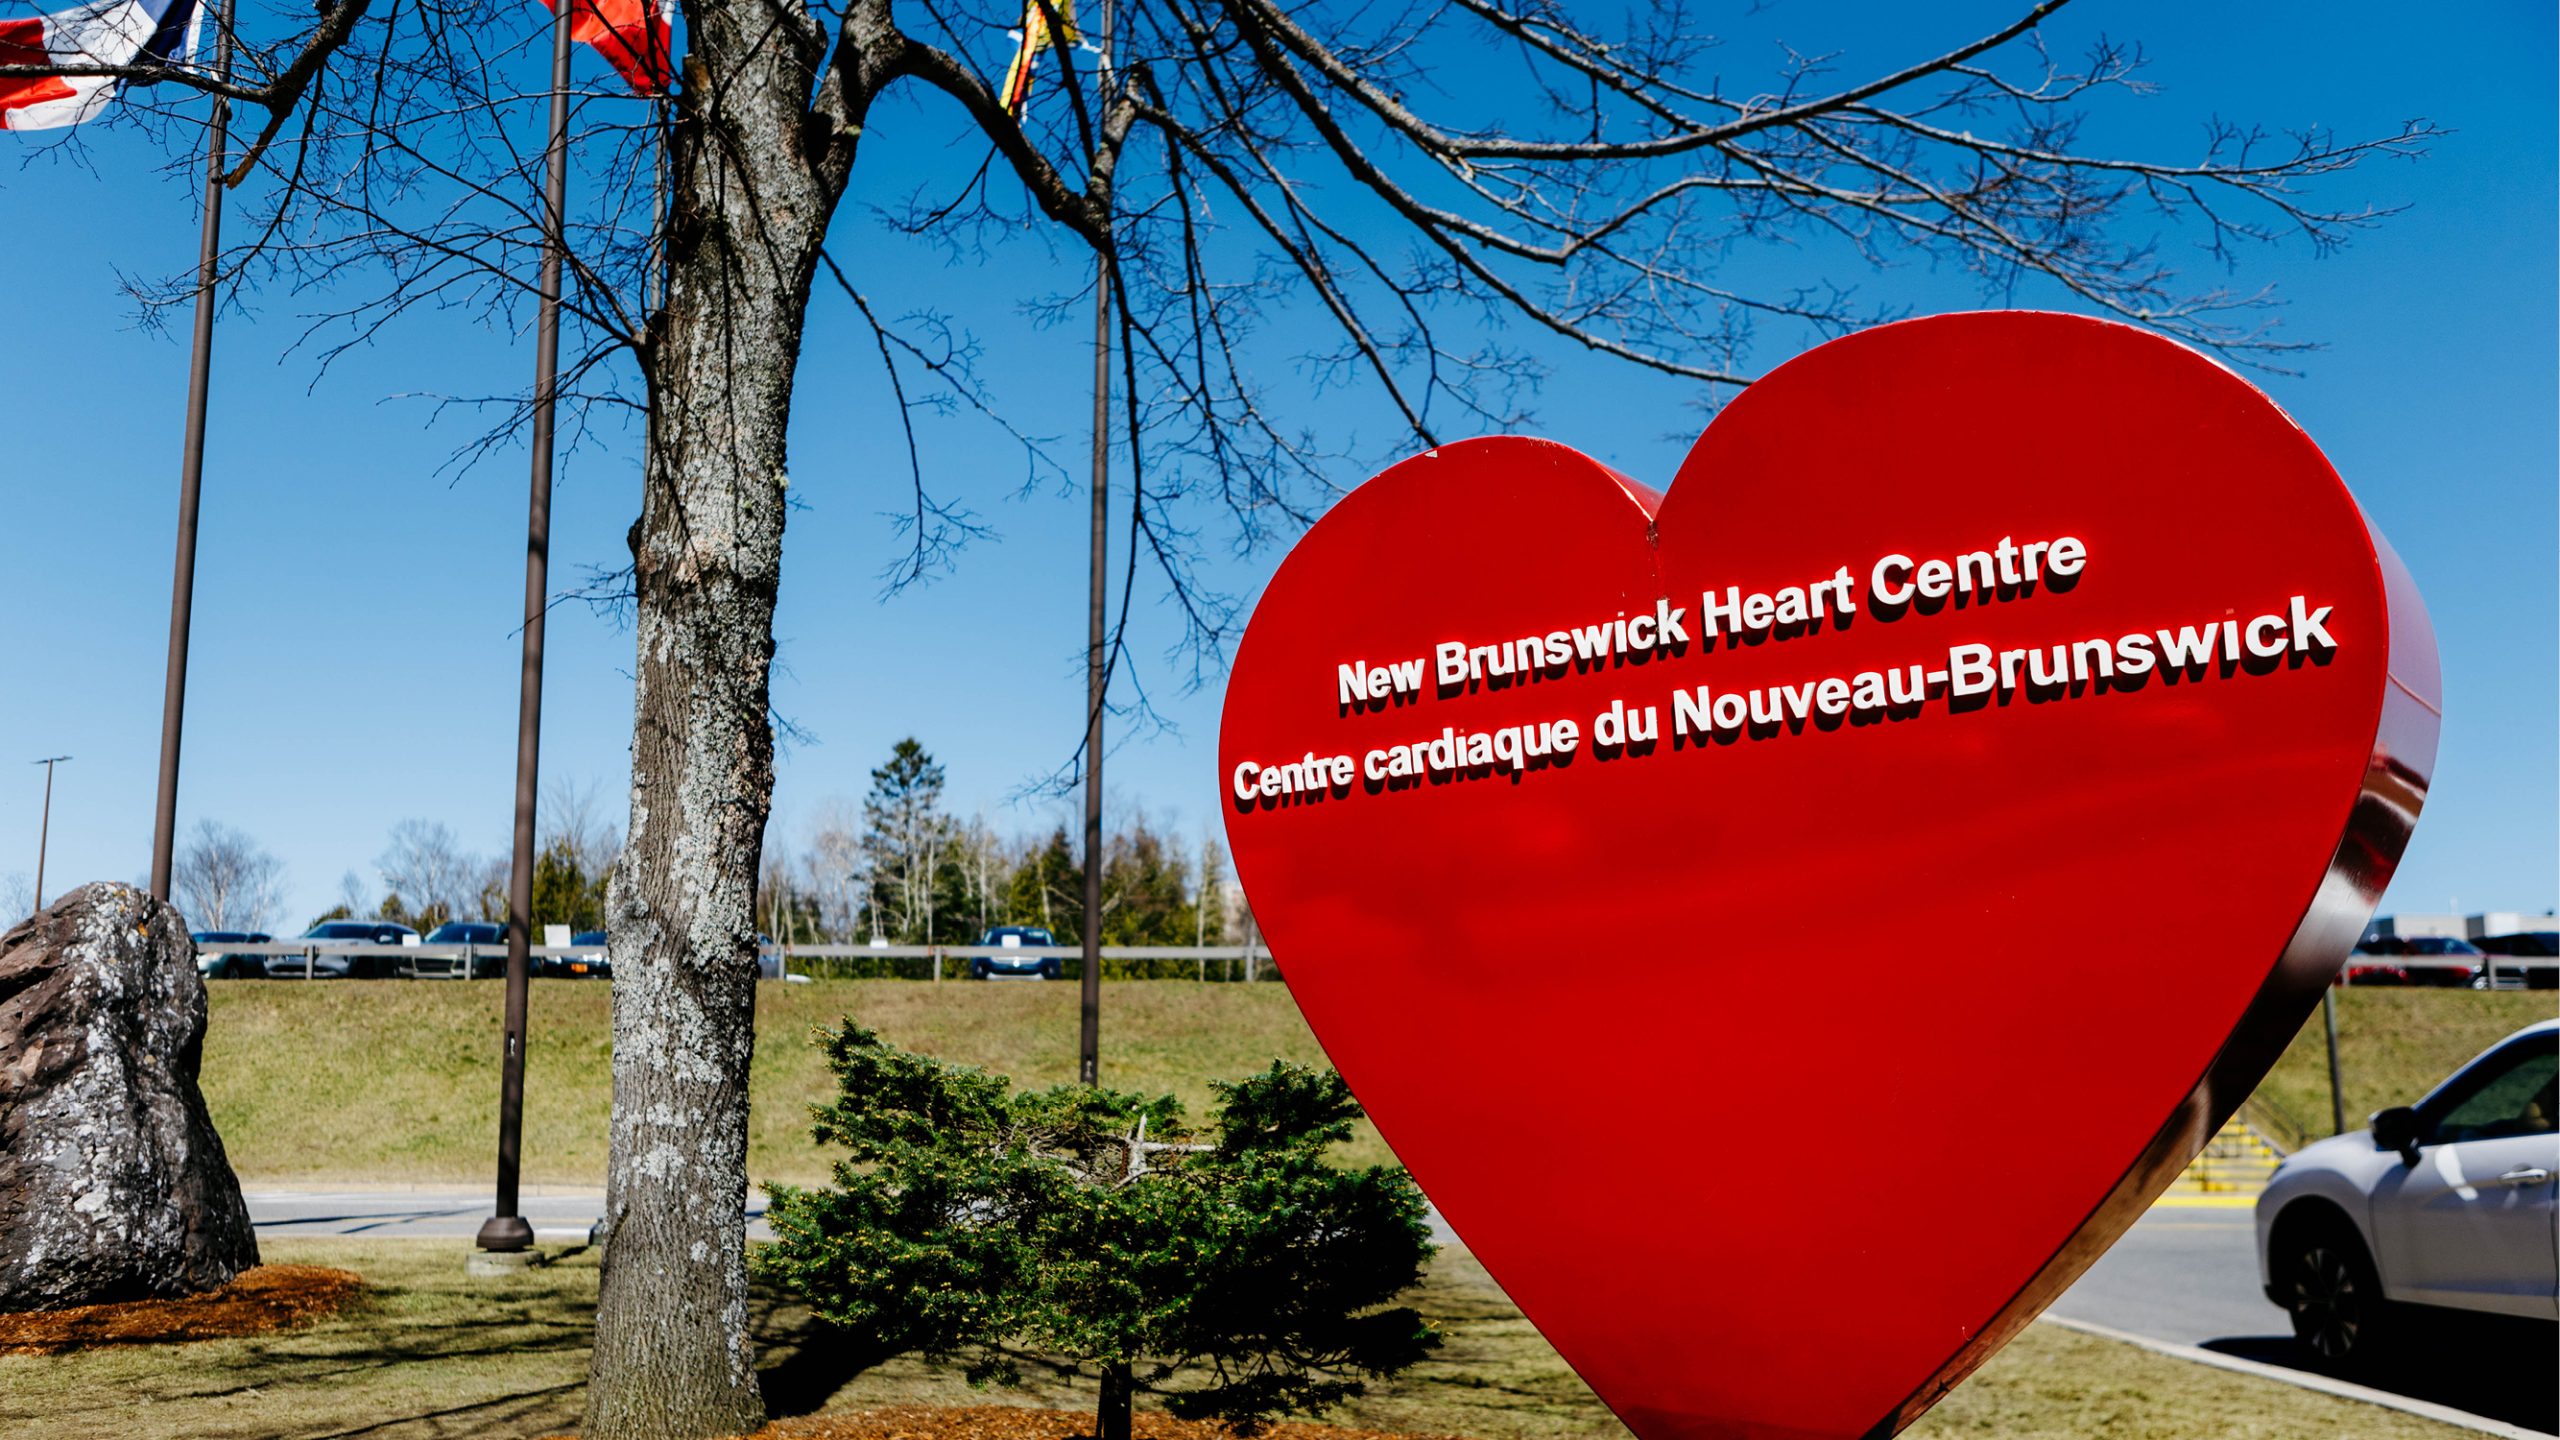 Shot of the exterior of the Saint John Regional Hospital capturing the large heart-shaped sign advertising it as the home of the New Brunswick Heart Centre.
